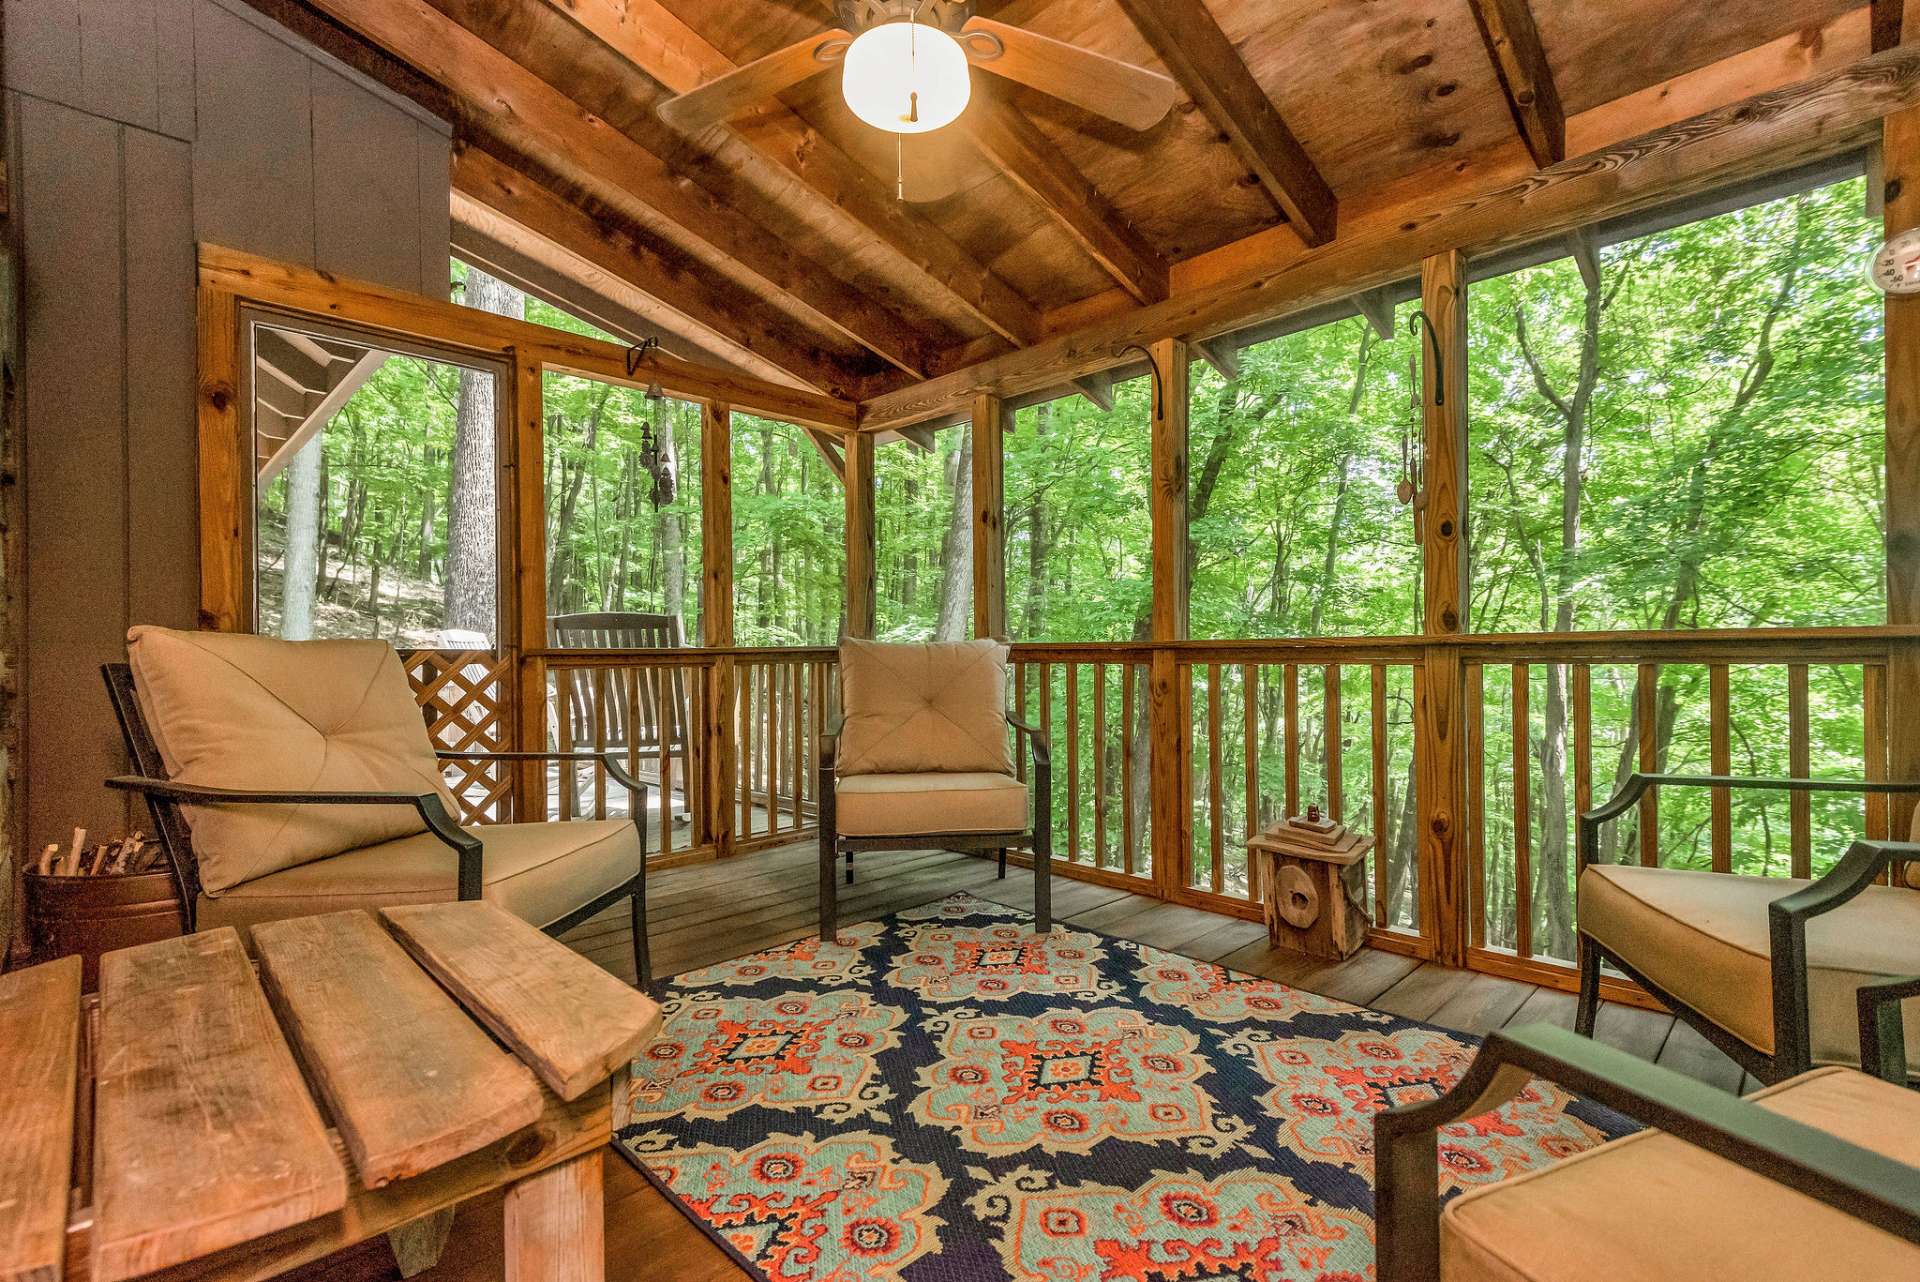 Step out to the screened outdoor living area - great for entertaining during the summer.